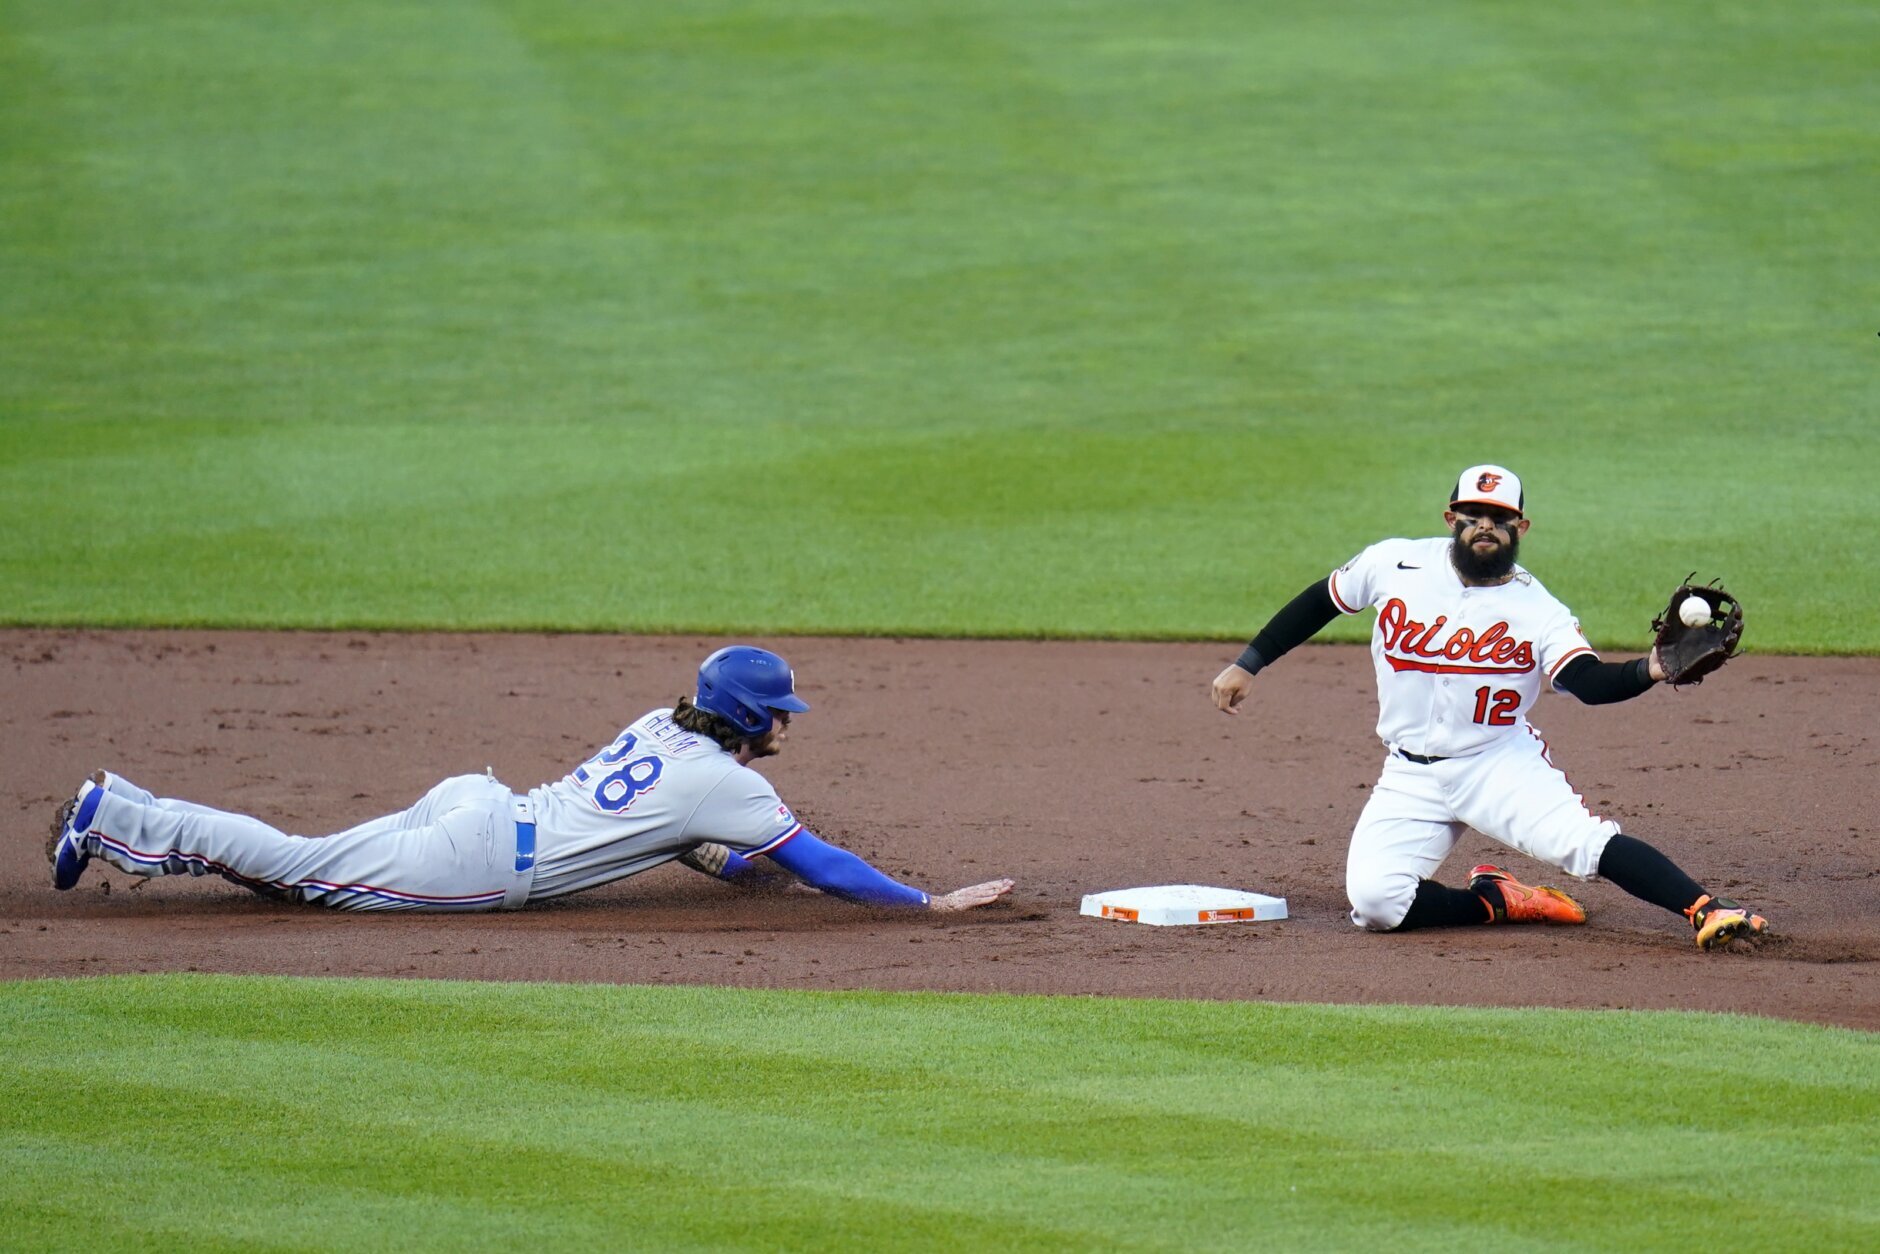 WATCH: Baltimore Orioles second baseman Rougned Odor produces